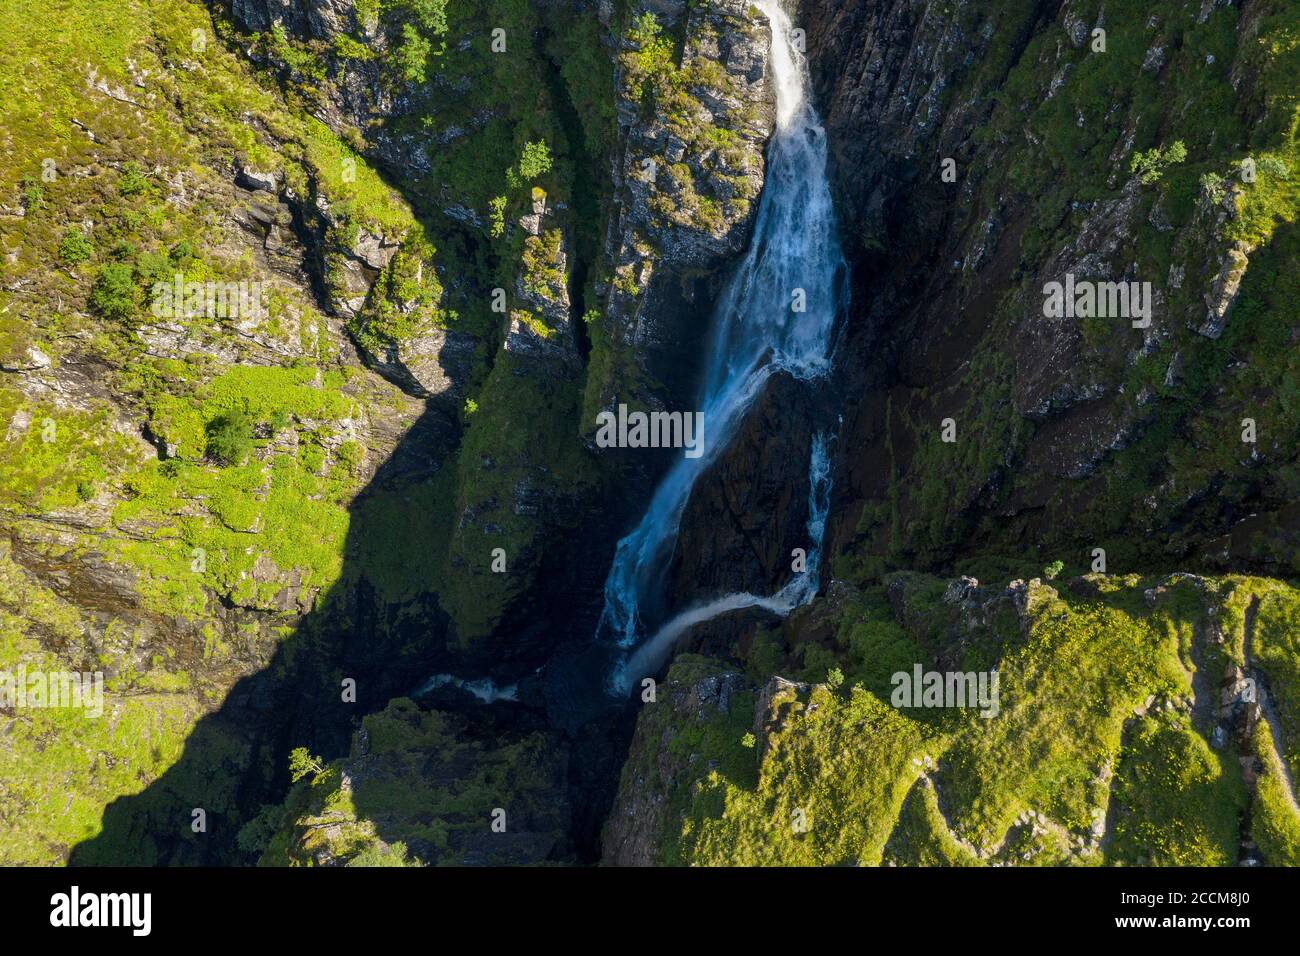 Aerial view of the Falls of Glomach in Ross-shire, western Scotland.  One of the tallest waterfalls in the UK, 113m high. Stock Photo